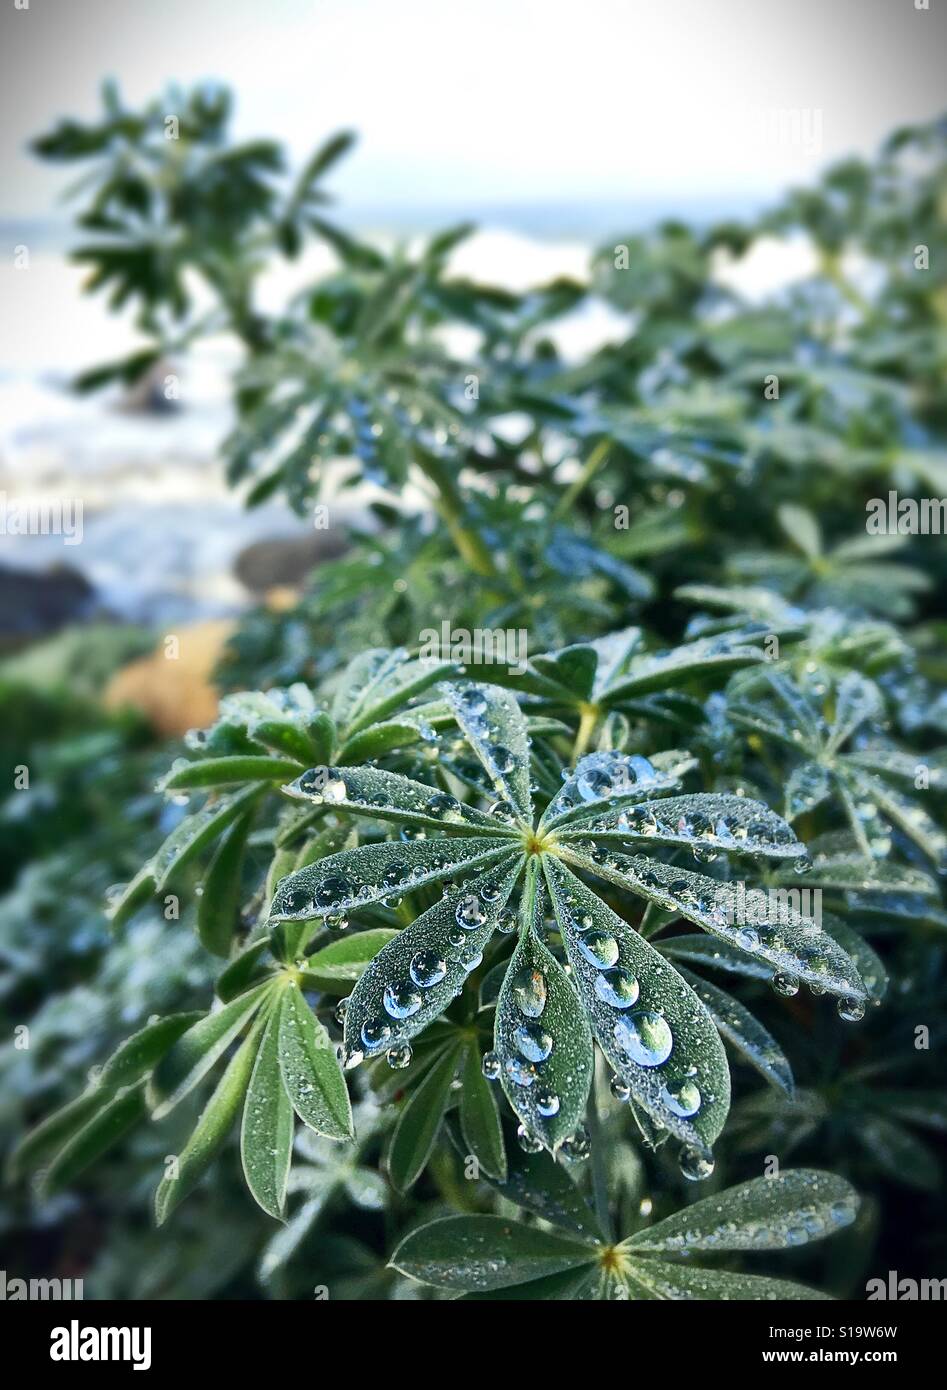 Dew drops on the leaves of a lupin plant. Stock Photo